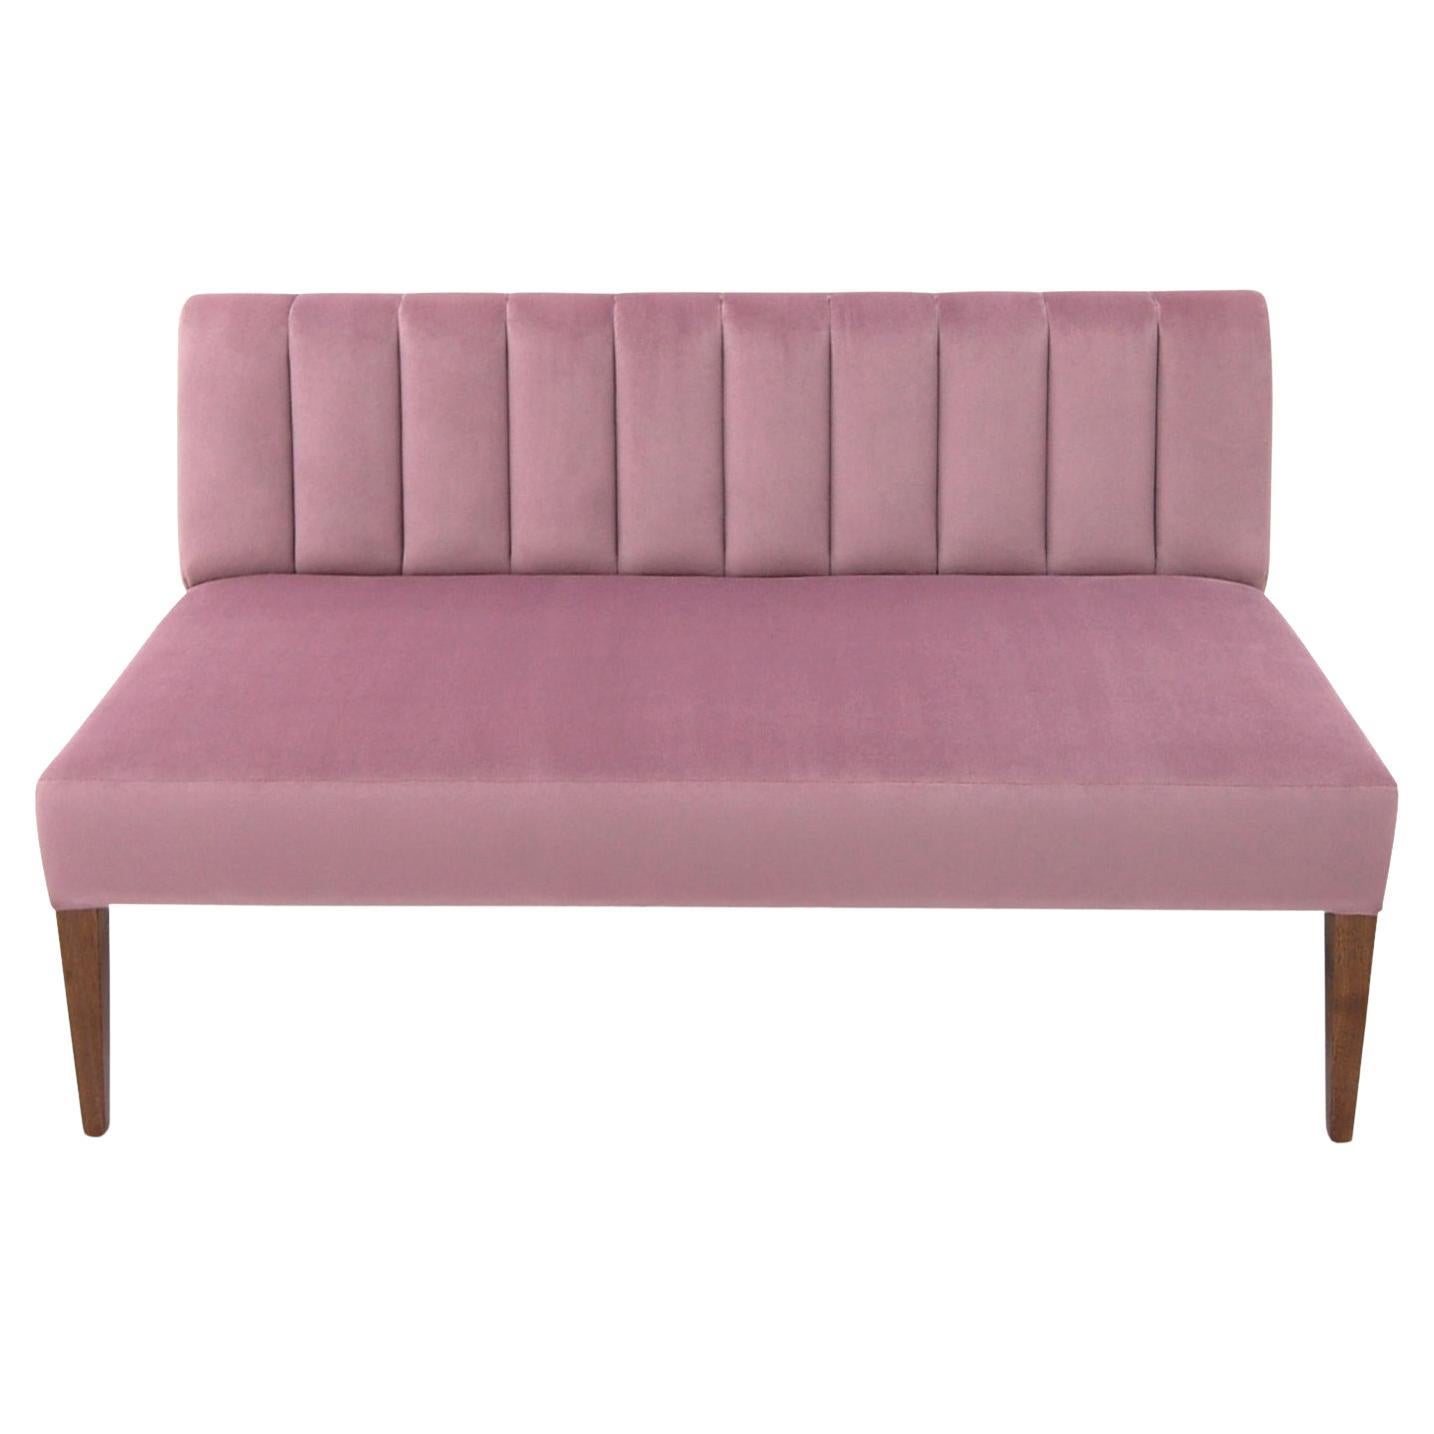 The sleek Morgan Banquette with Channeling is cozy and charming. It is accented by tapered legs and strikes the perfect balance of utility and sophistication.